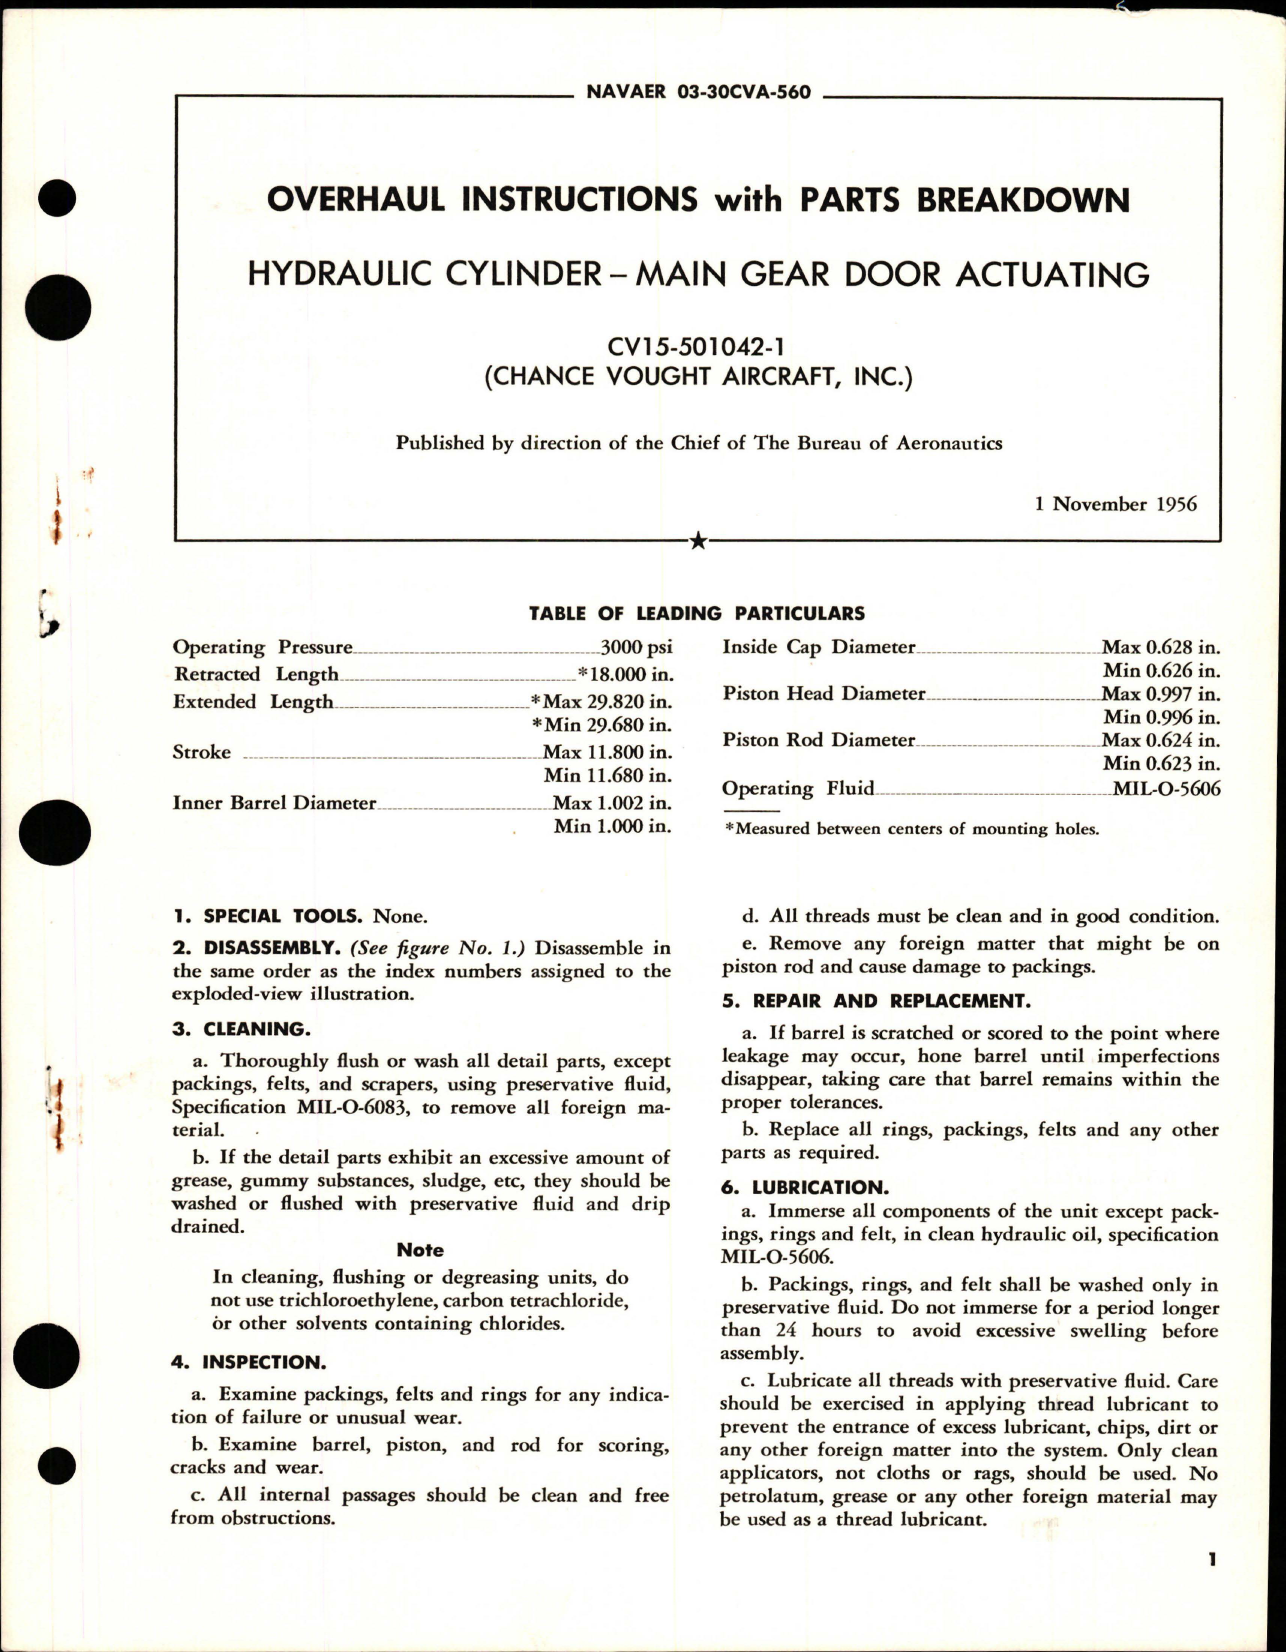 Sample page 1 from AirCorps Library document: Overhaul Instructions with Parts for Main Gear Door Actuating Hydraulic Cylinder - CV15-501042-1